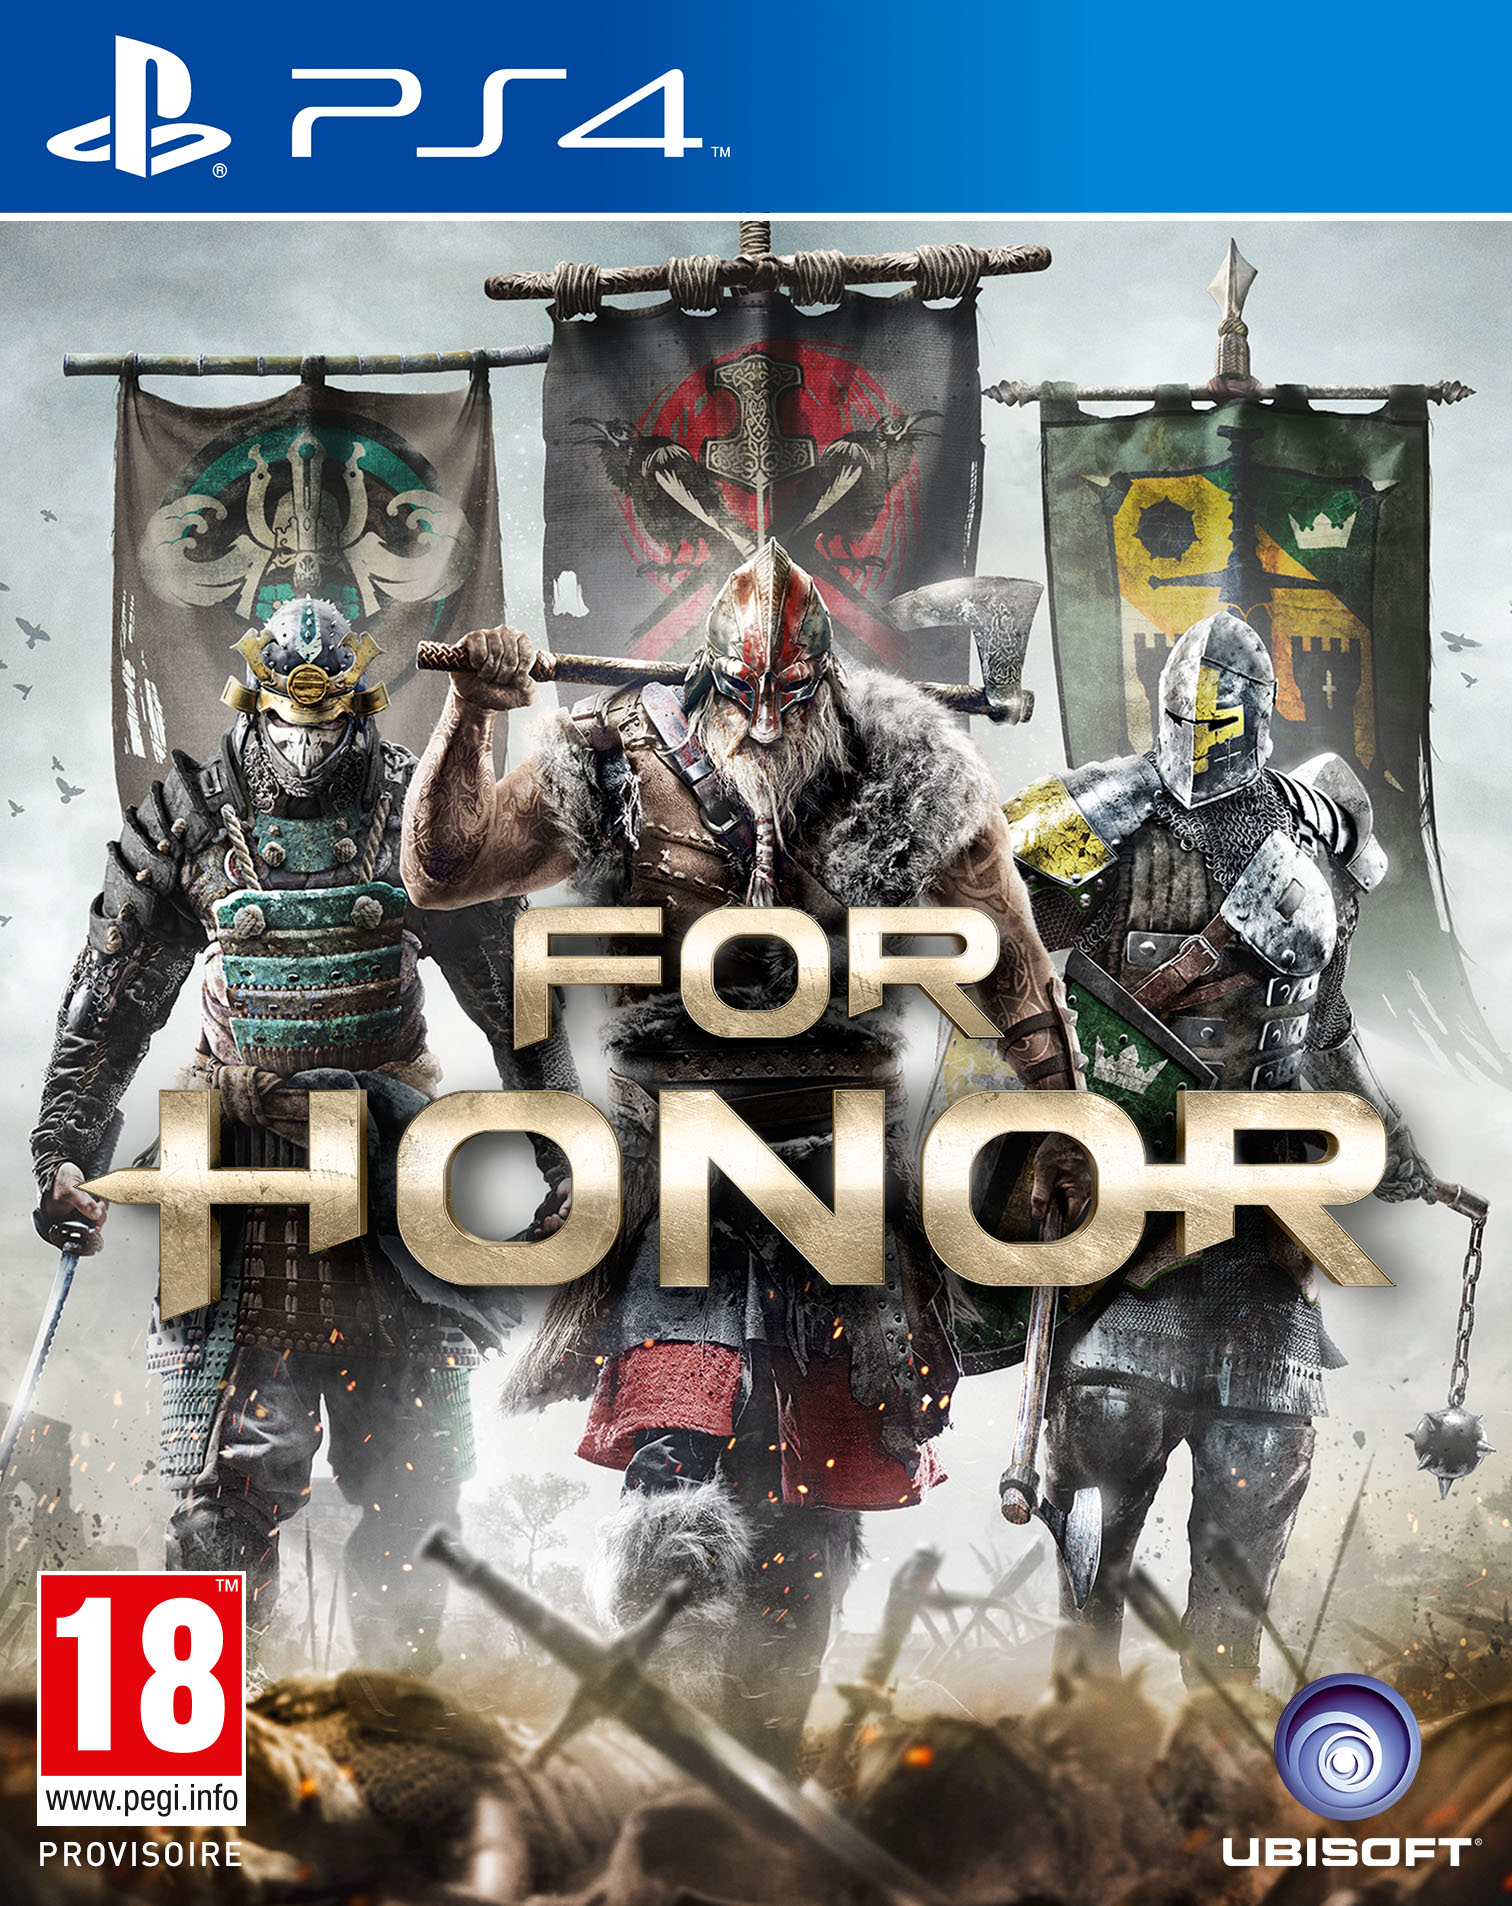 download for honor ps5 for free